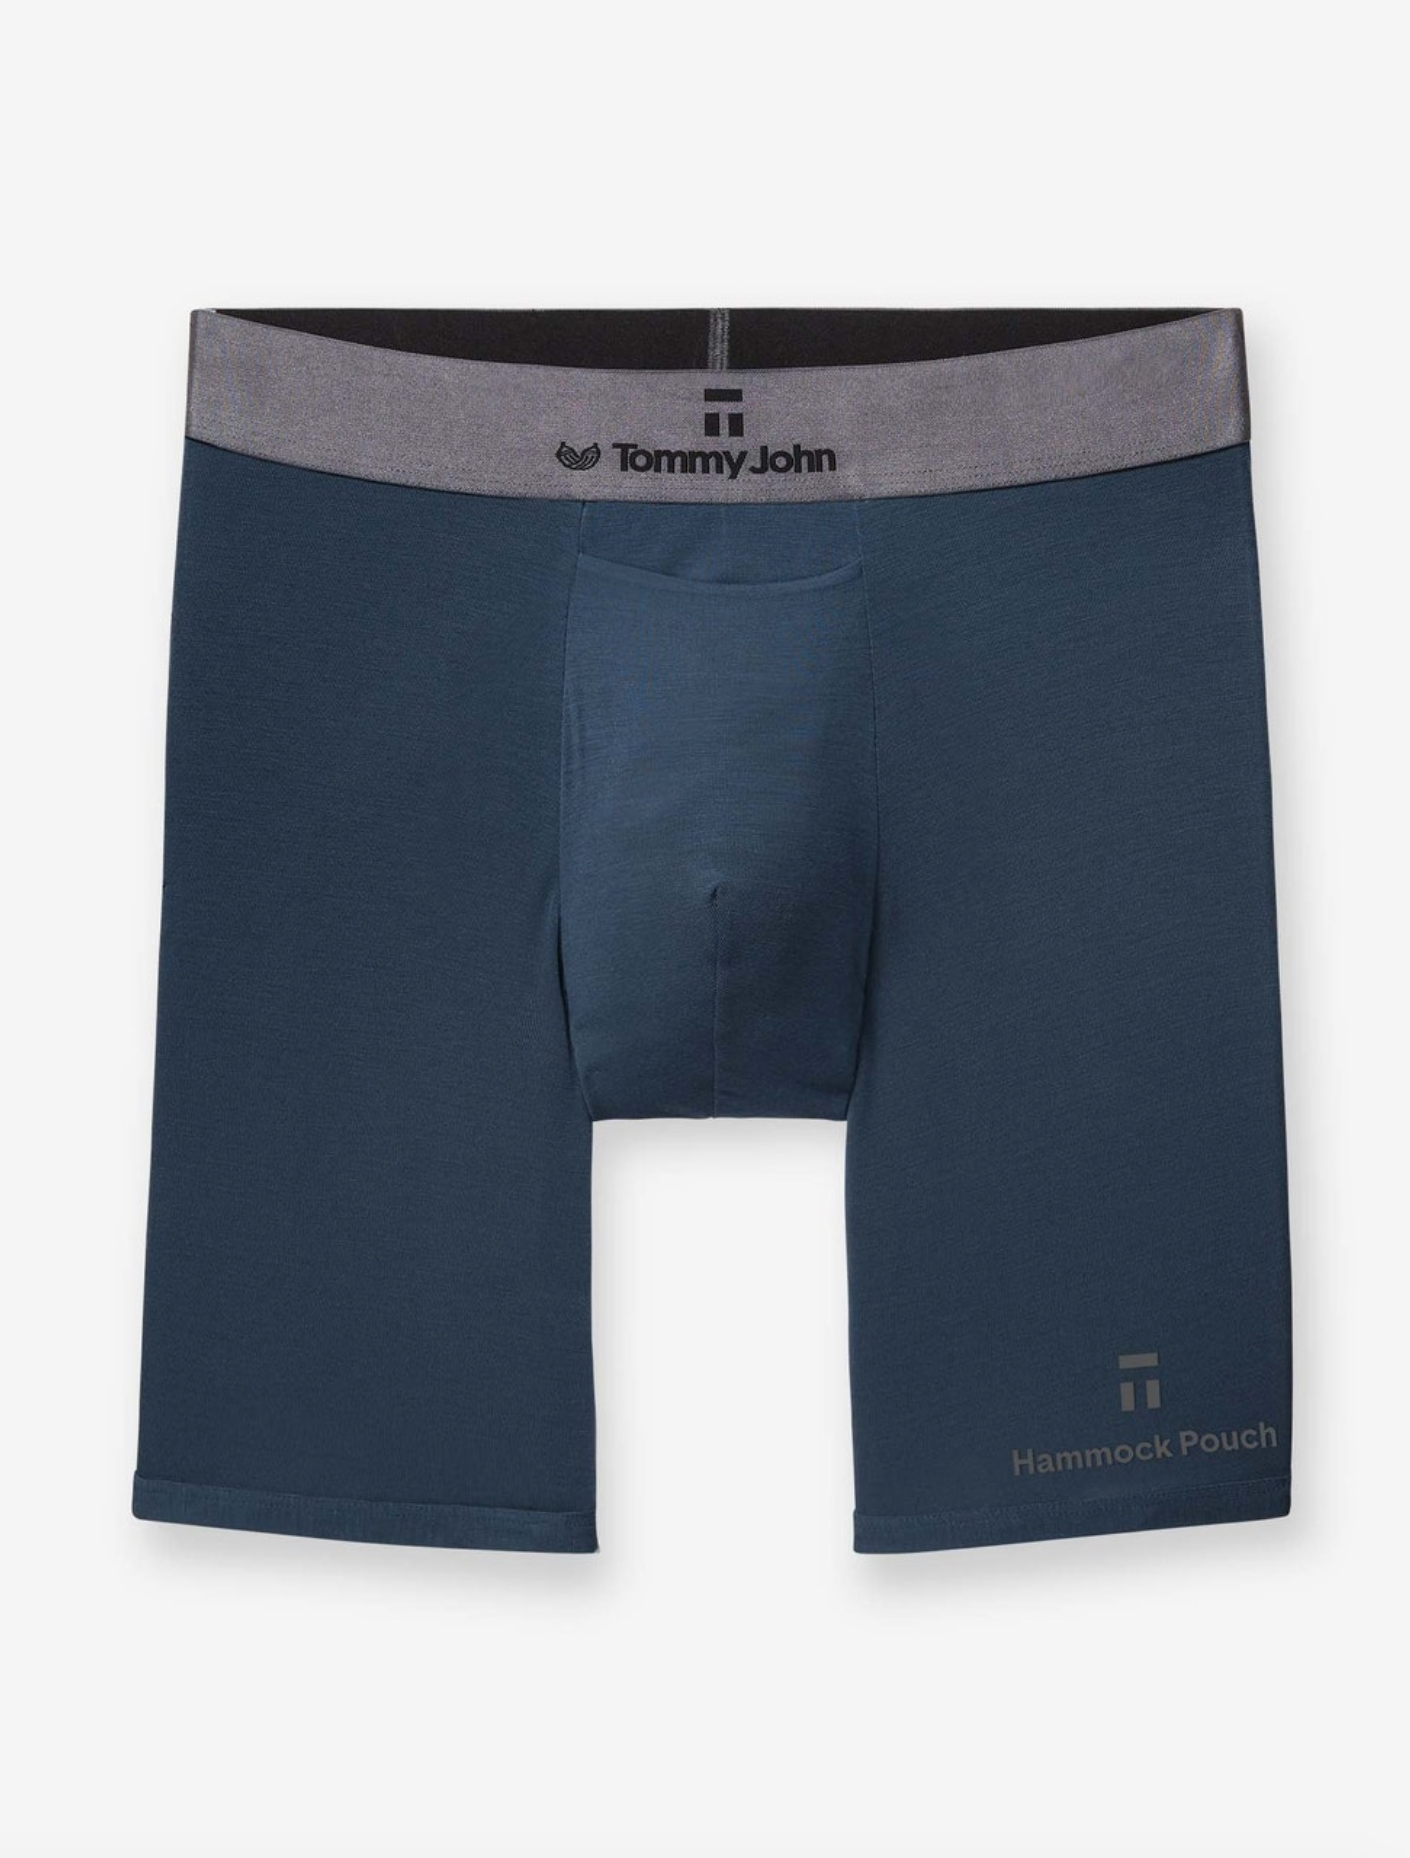 Tommy John Men's Second Skin Hammock Pouch™ Trunk 4 Boxer Brief in Blue  Size Small